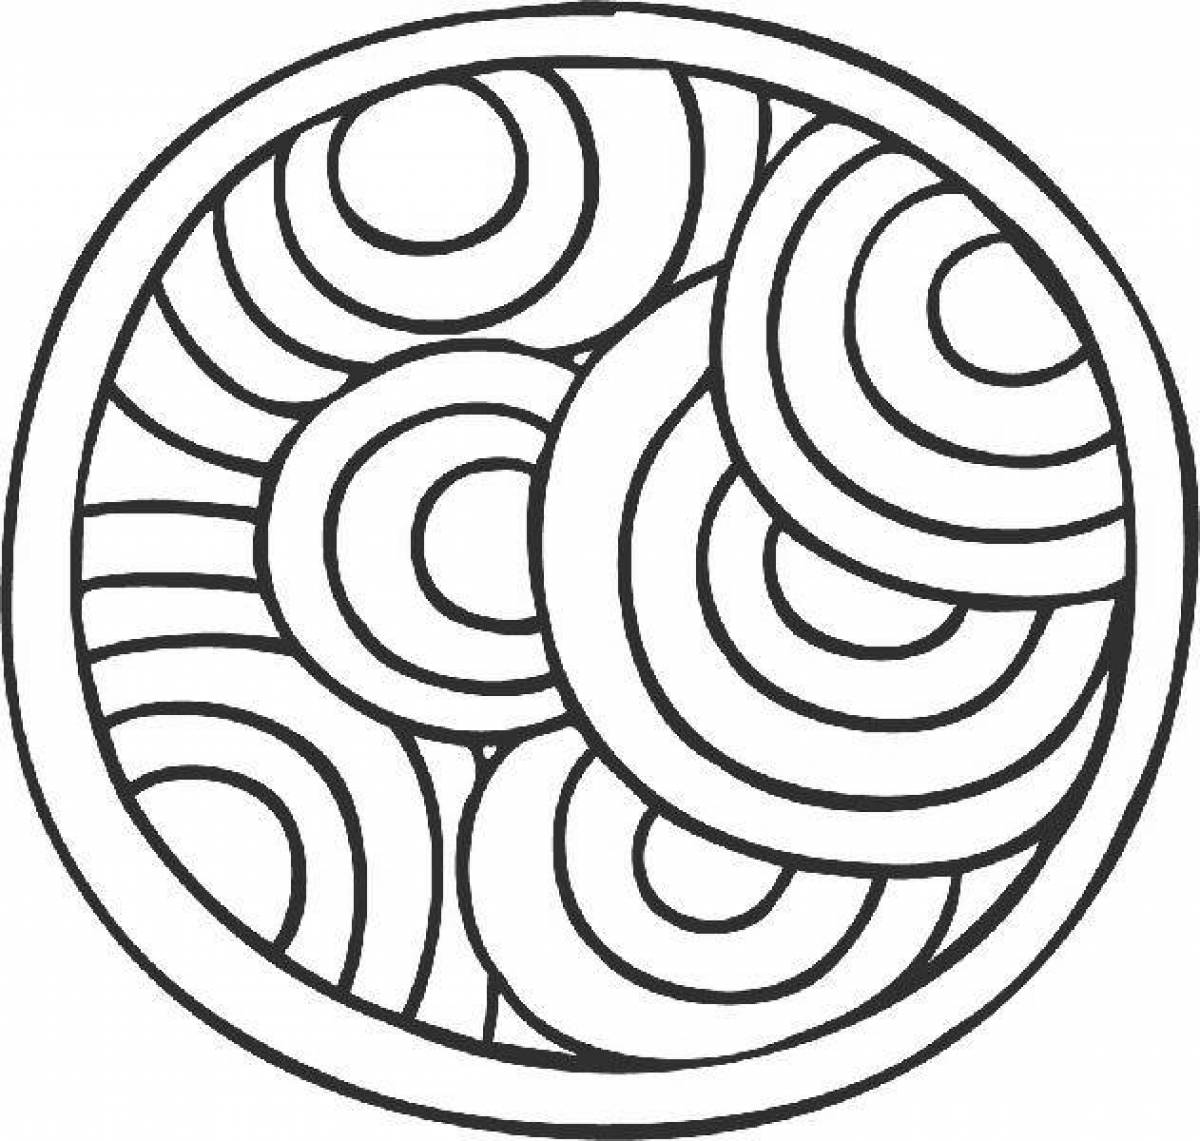 Betty's charming spiral create a coloring page